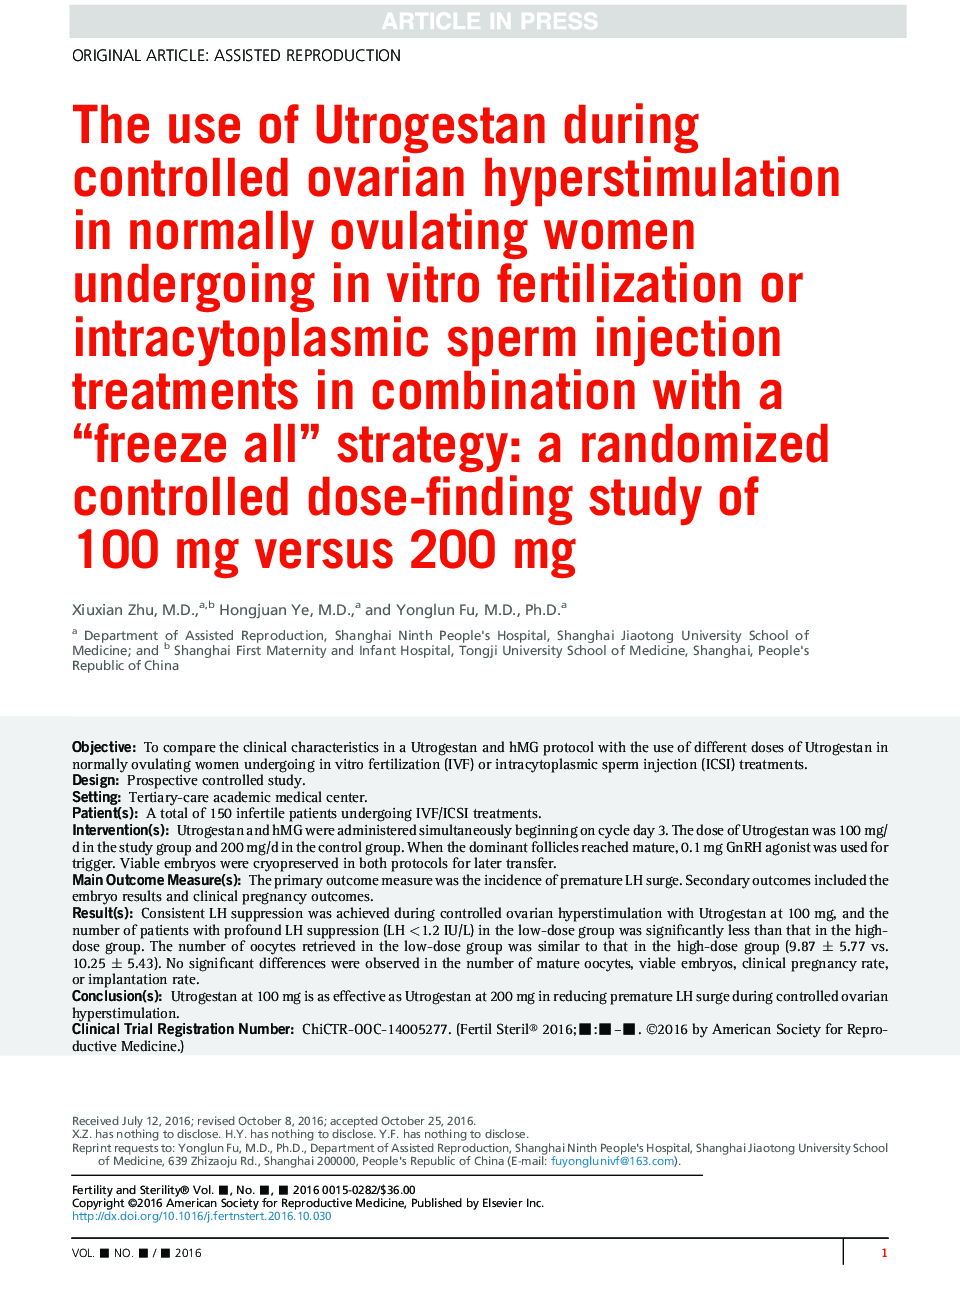 Use of Utrogestan during controlled ovarian hyperstimulation in normally ovulating women undergoing inÂ vitro fertilization or intracytoplasmic sperm injection treatments in combination with a “freeze all” strategy: a randomized controlled dose-finding st